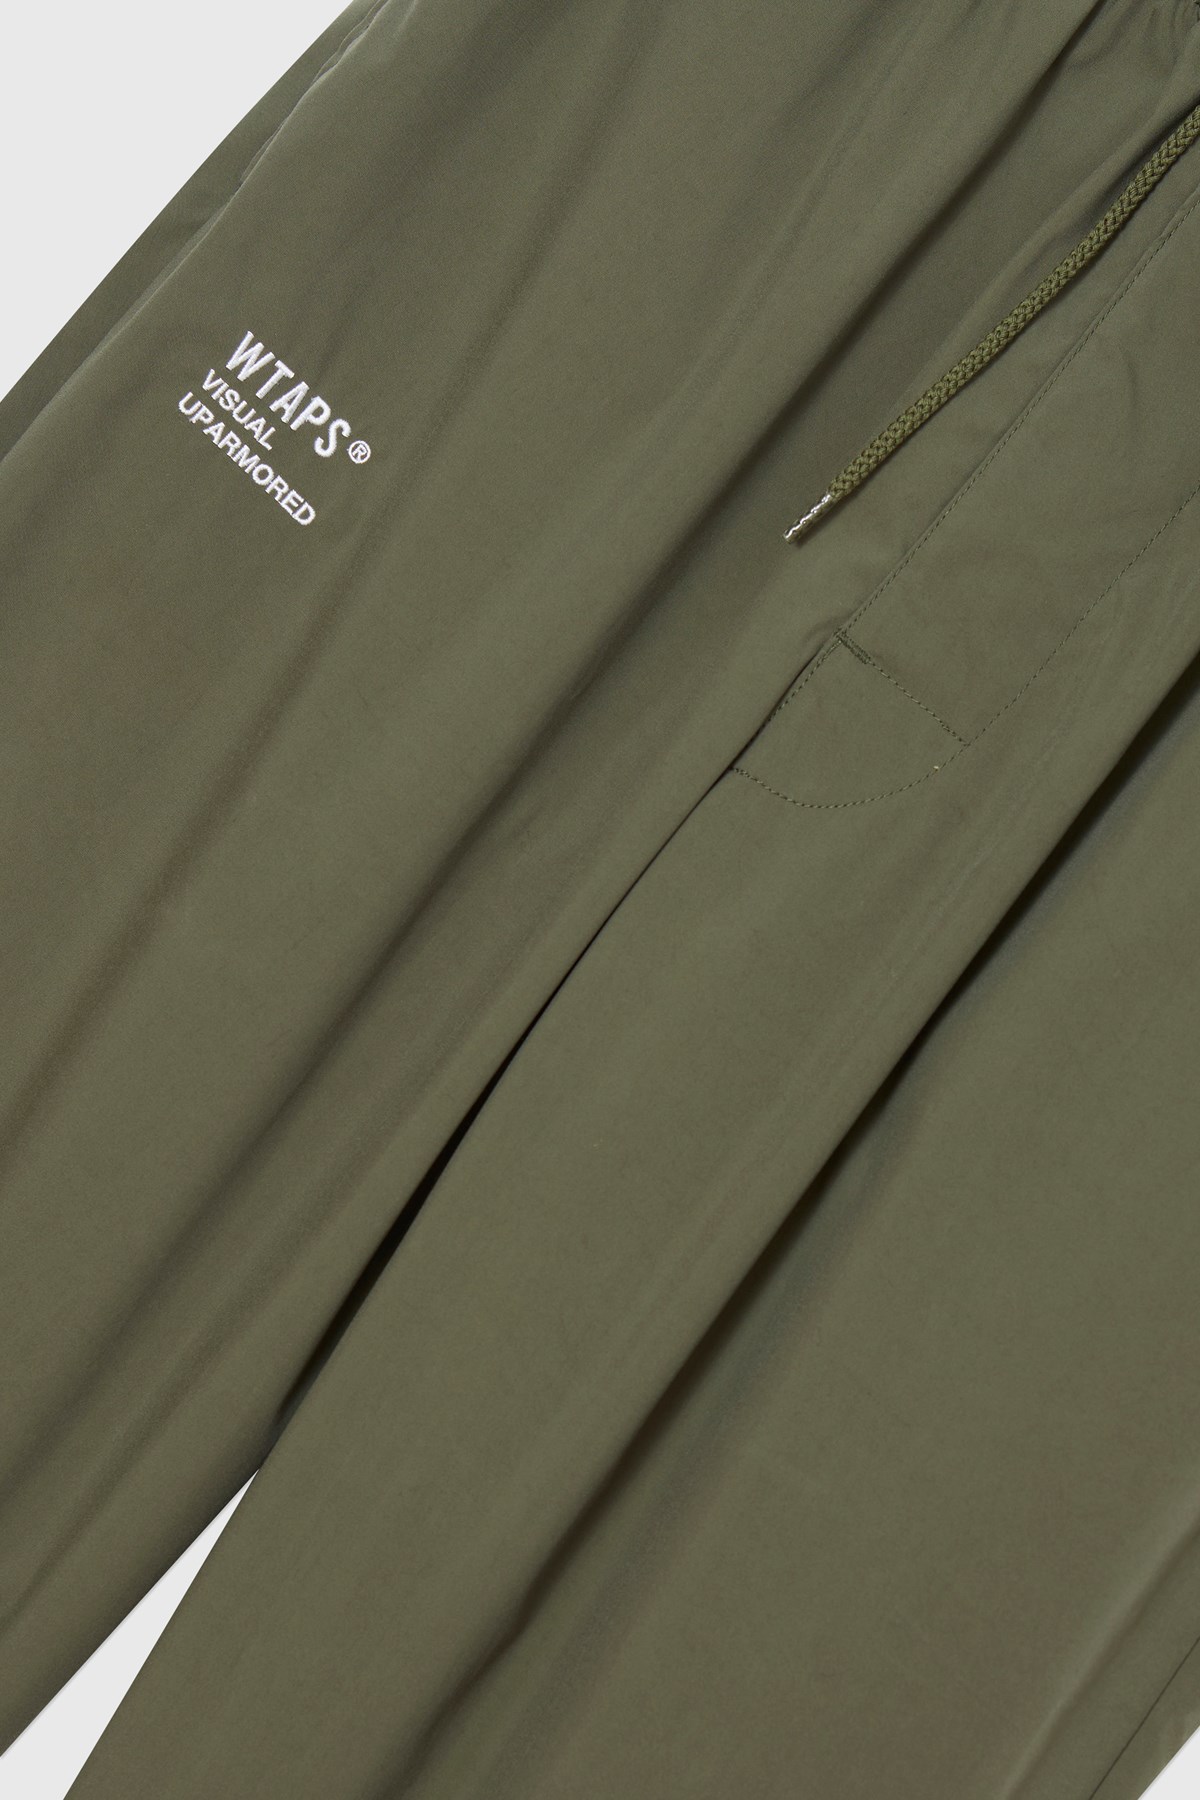 WTAPS SEAGULL 02 / TROUSERS Olive drab | WoodWood.com